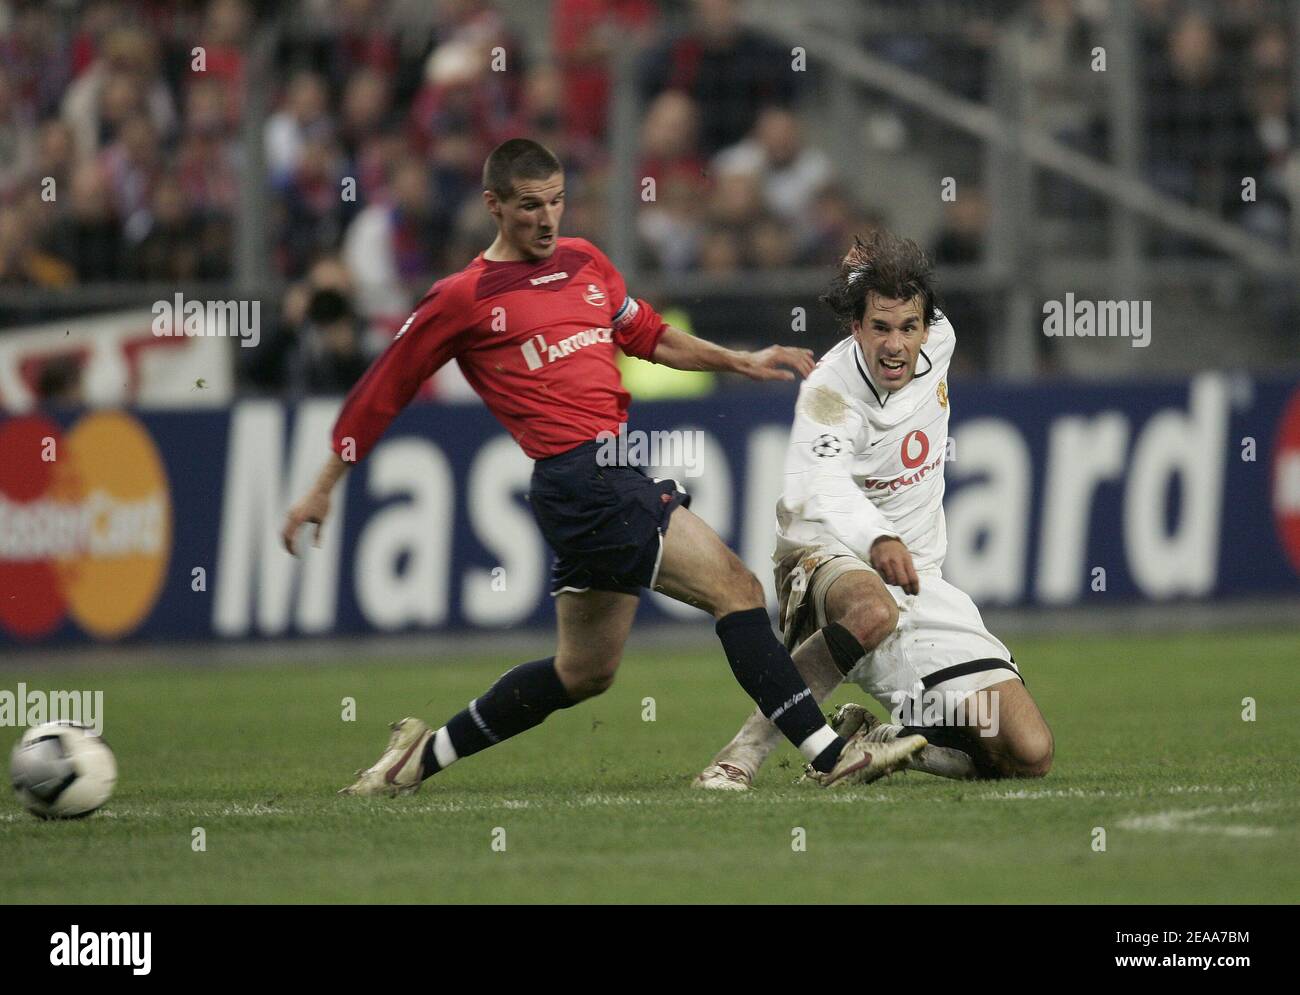 Manchester's Ruud Van Nistelrooy clears the ball under pressure from Lille's Gregory Tafforeau during the UEFA Champions League, Lille vs Manchester, in Saint-Denis near Paris, France, on November 2, 2005. Lille won 1-0. Photo by Laurent Zabulon/ABACAPRESS.COM Stock Photo